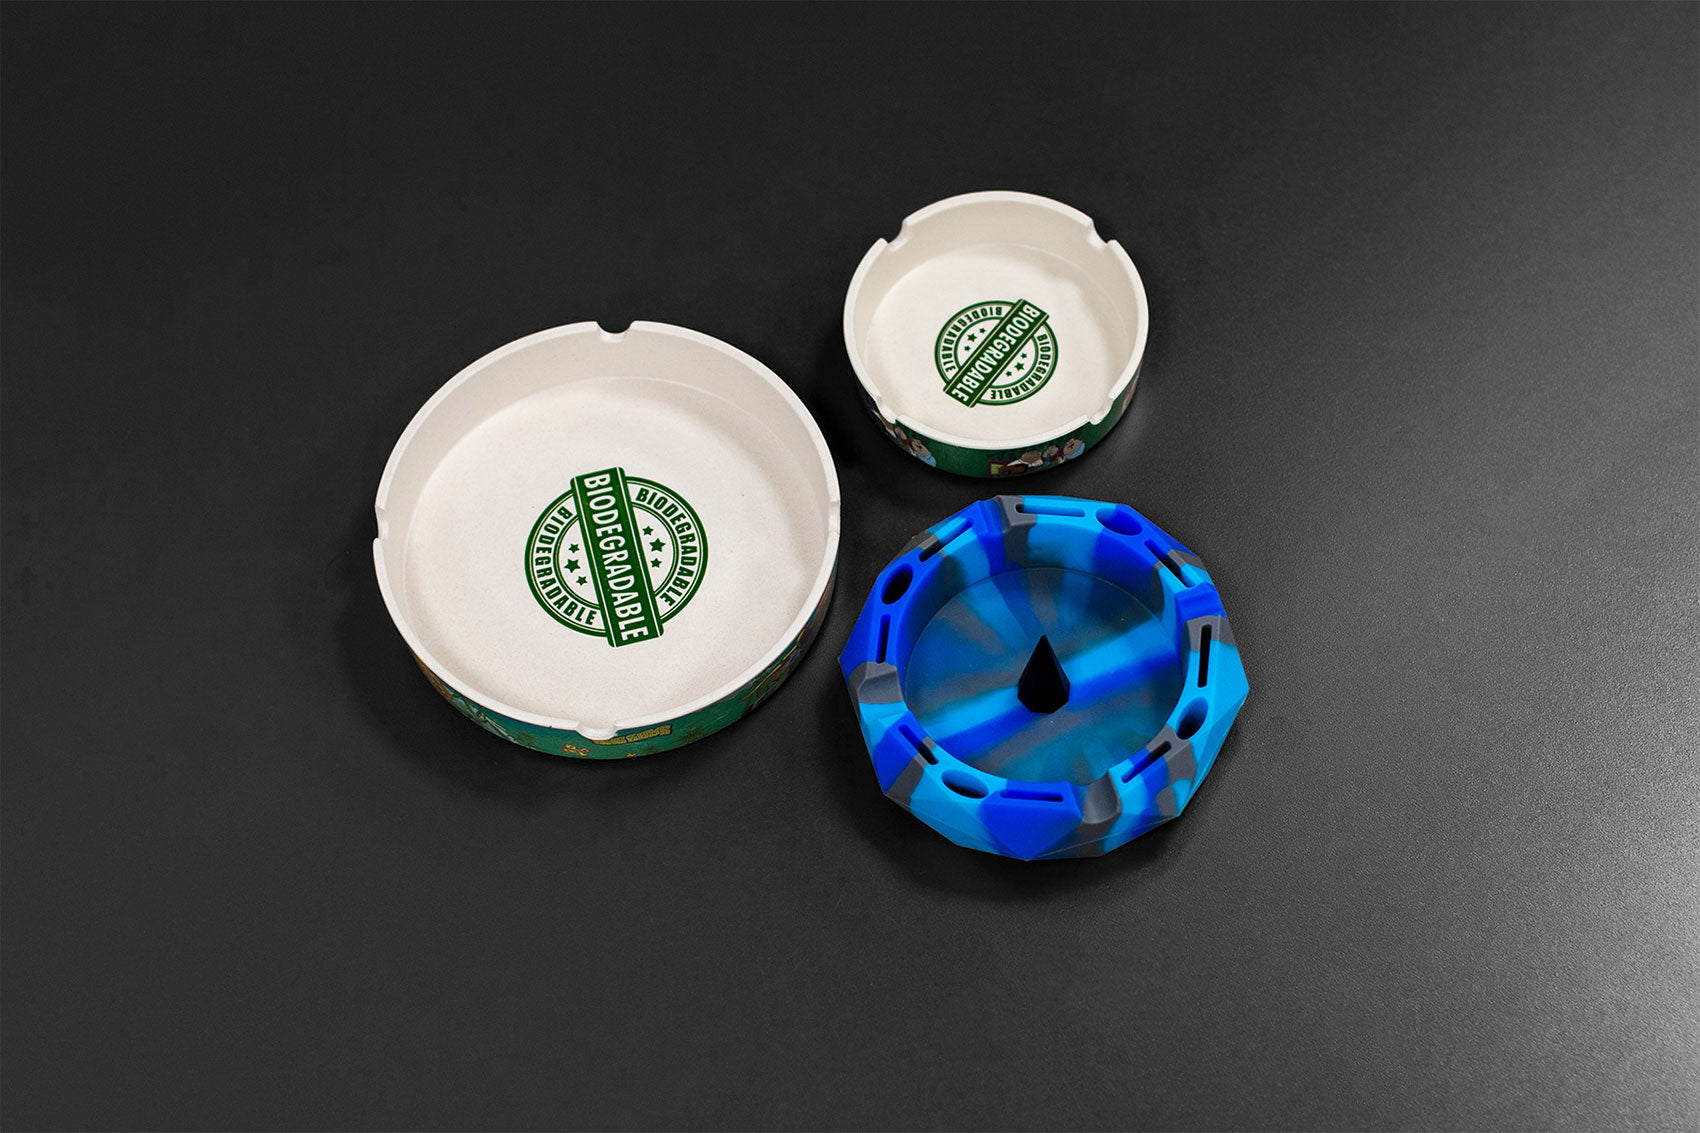 Wholesale Ashtrays above view standing on a black office table